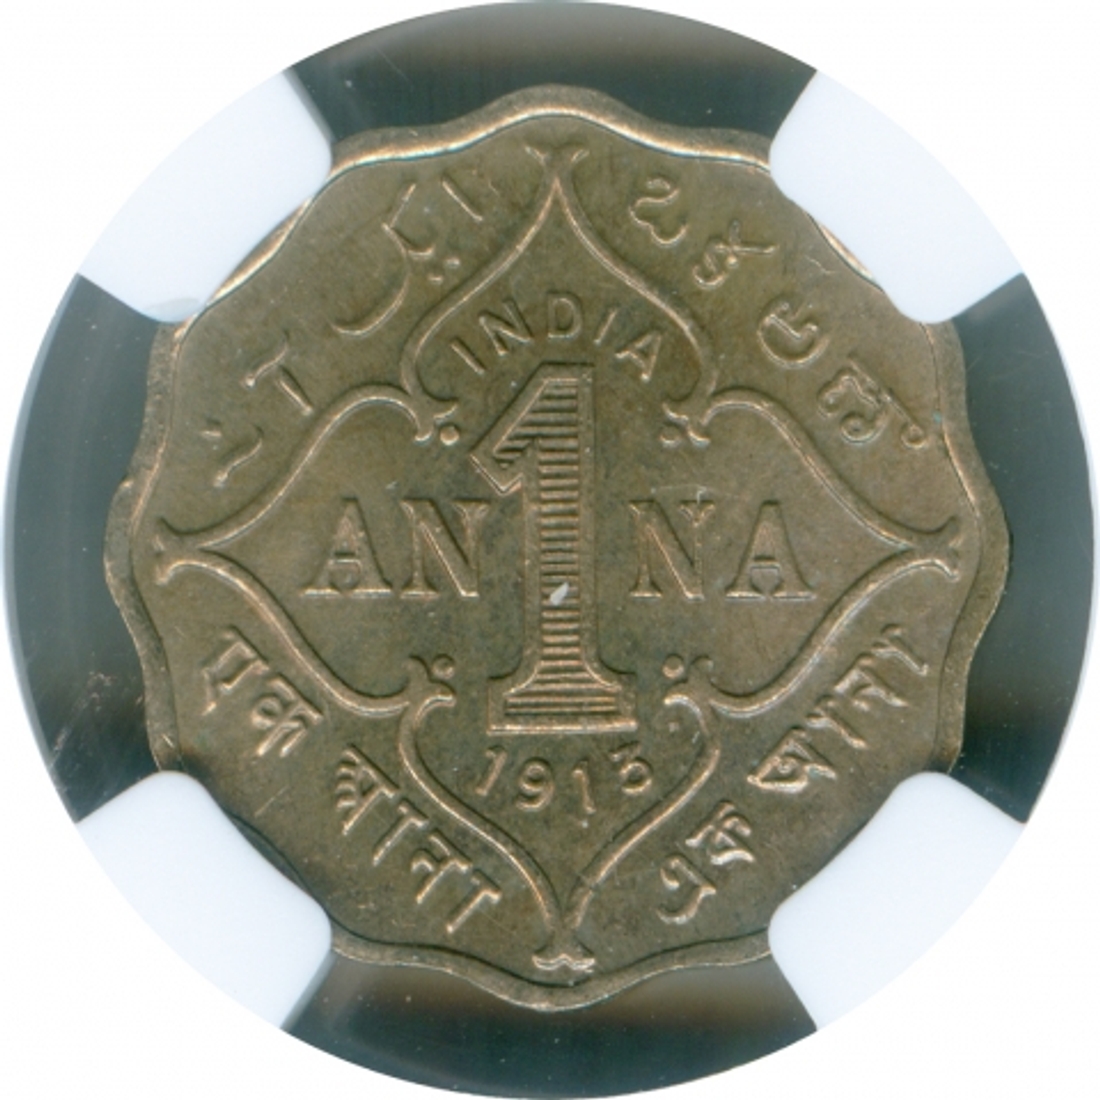 Copper Nickel One Anna Coin of King George V of Bombay Mint of 1913.